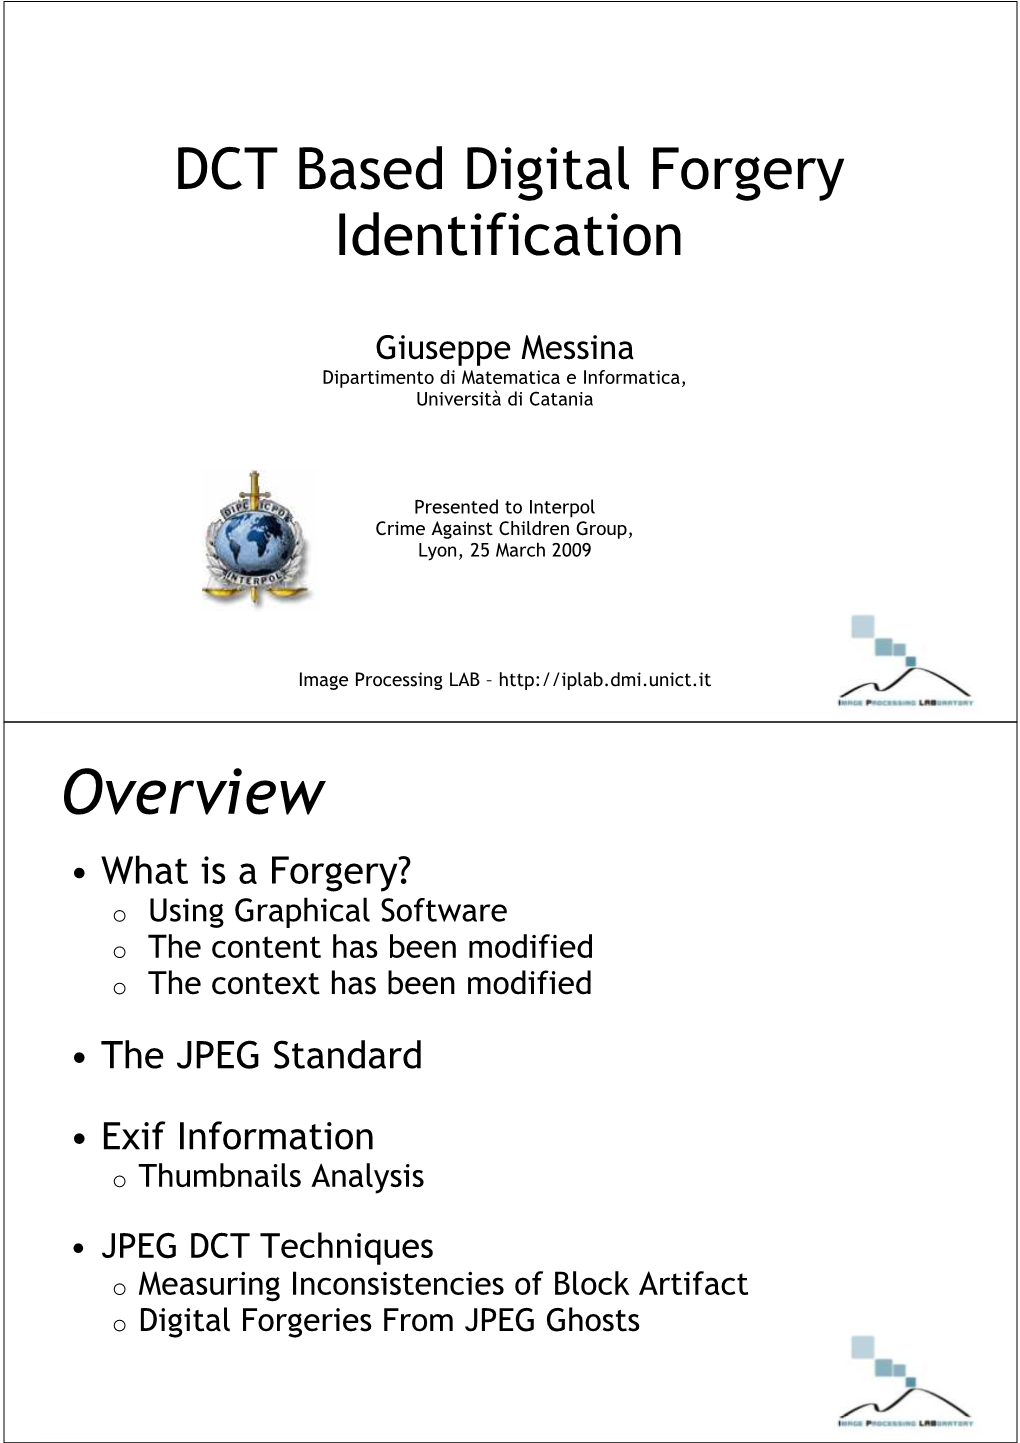 DCT Based Digital Forgery Identification